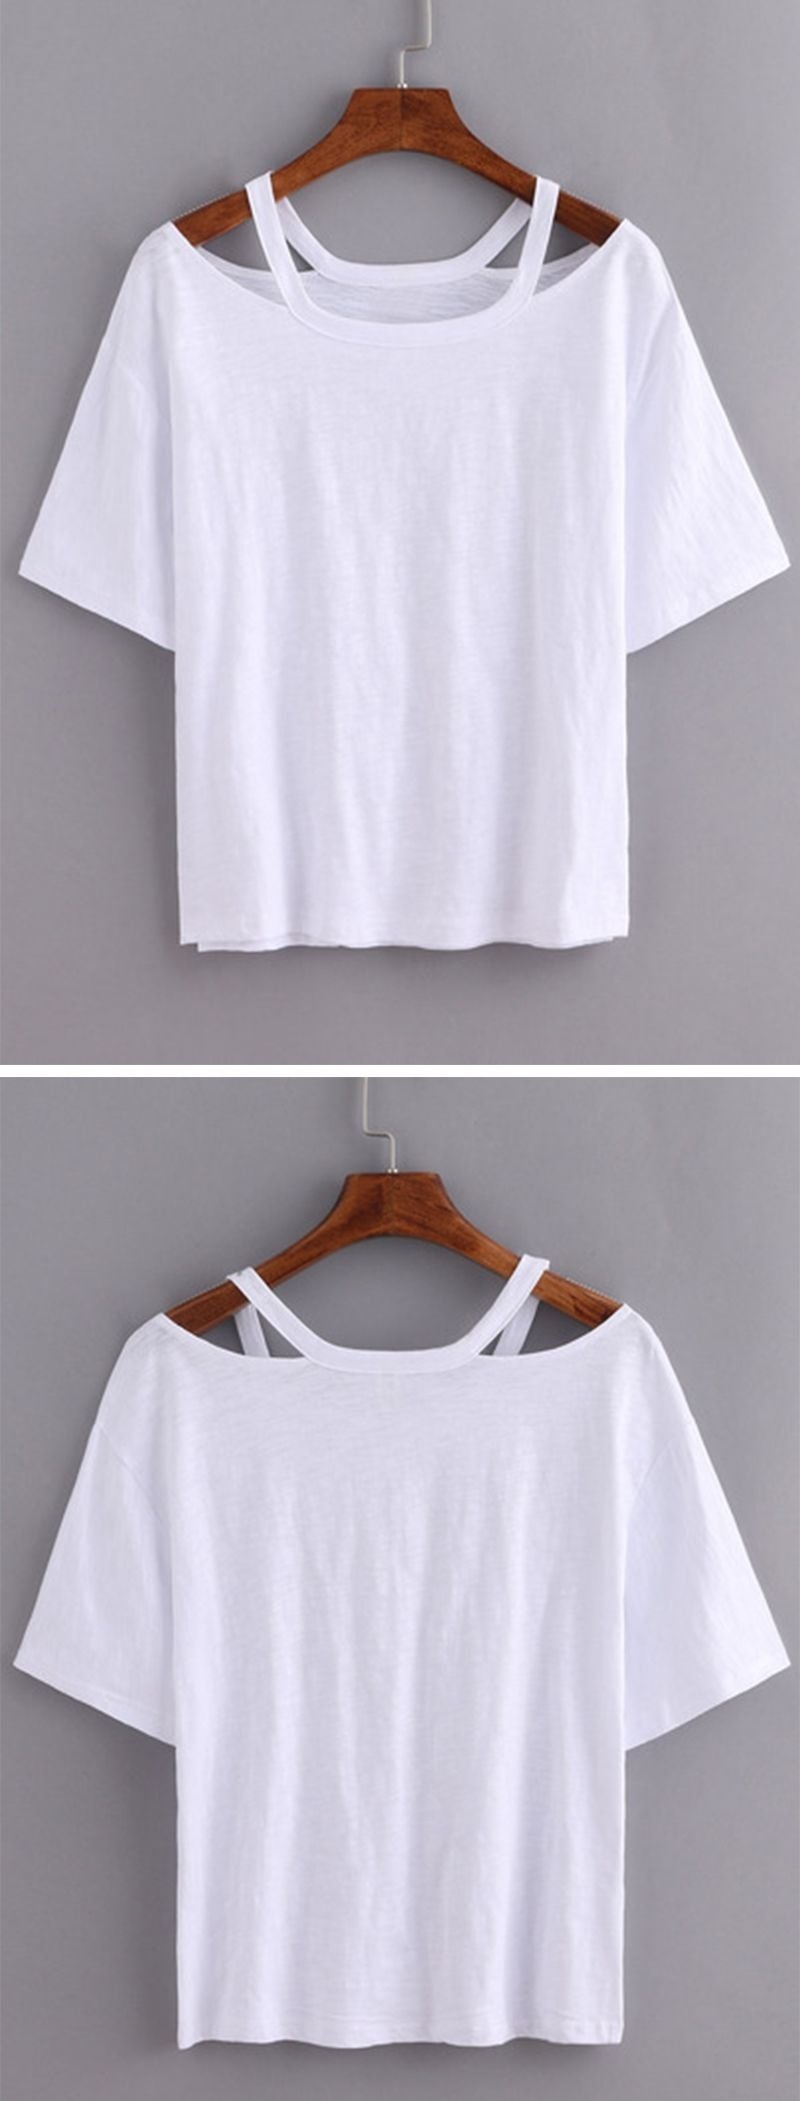 10 Attractive Diy Cut T Shirt Ideas cutout loose fit white t shirt with 3 from jdzigner www jdzigner 5 2022